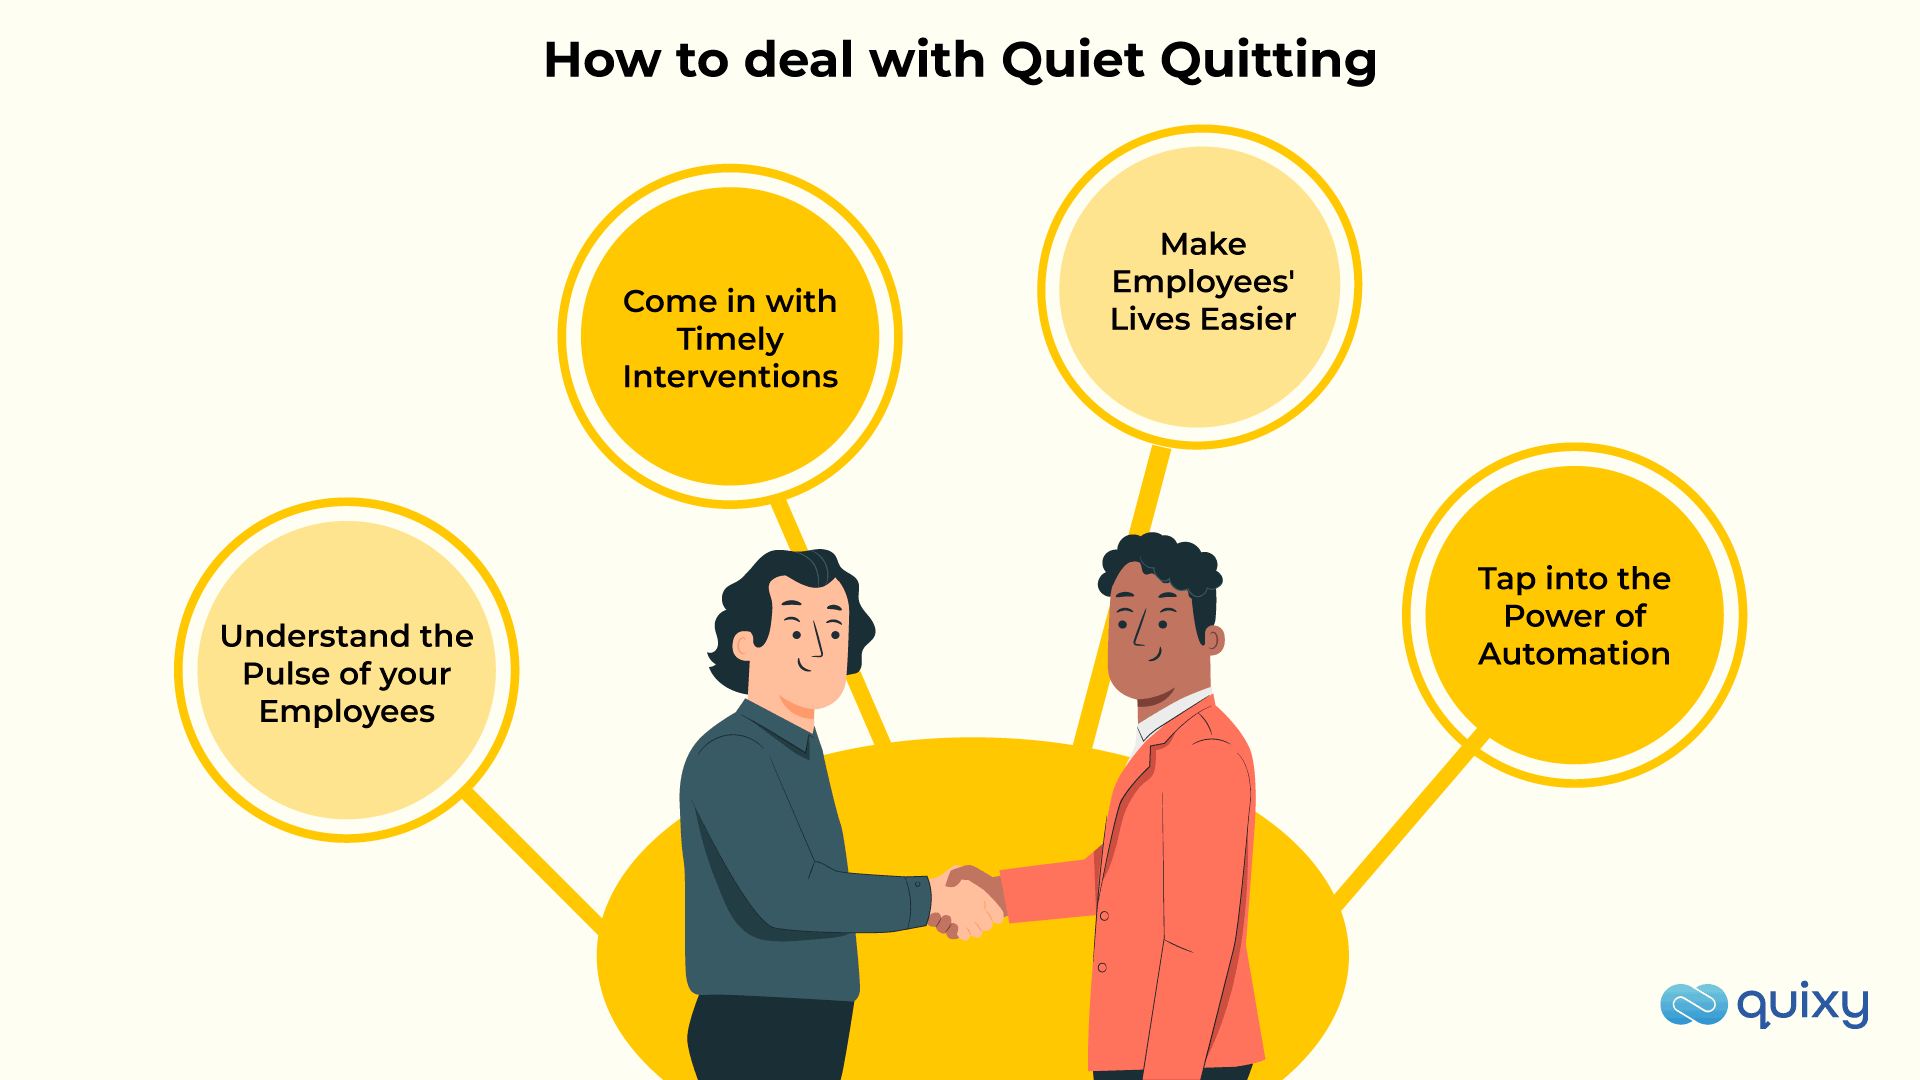 How to deal with Quiet Quitting